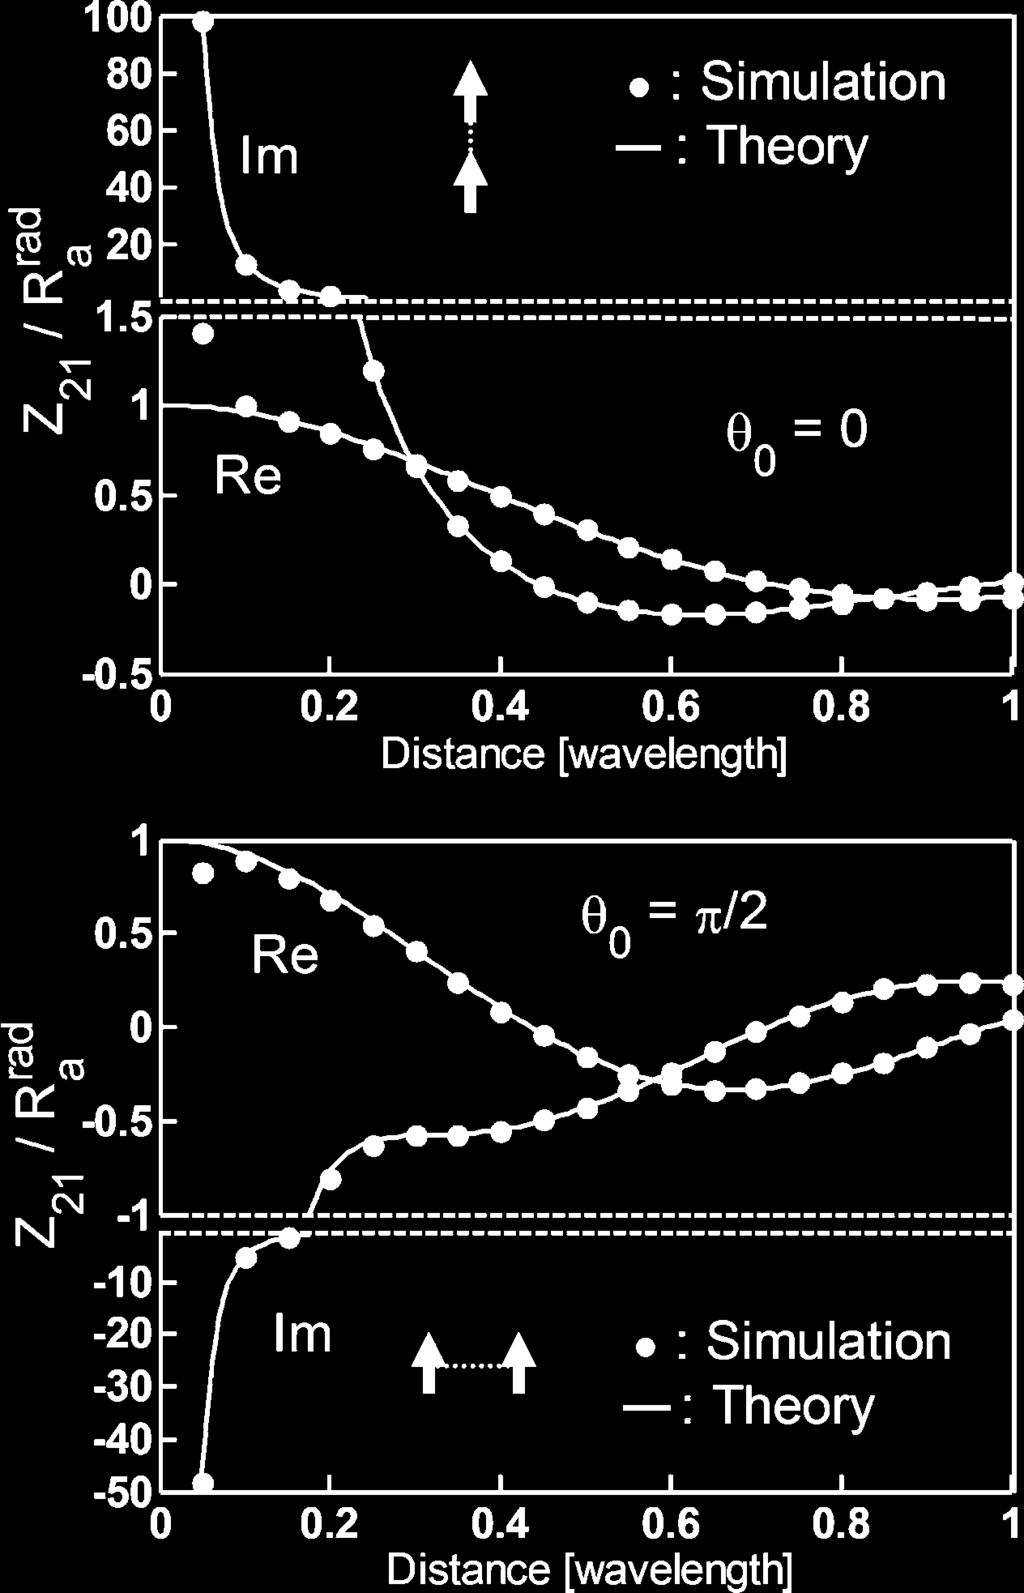 So, the larger magnitude of load is proper at a closer distance. The dependence on the radiation efficiency as a crucial factor in the maximum power transfer efficiency is shown in Fig. 6.